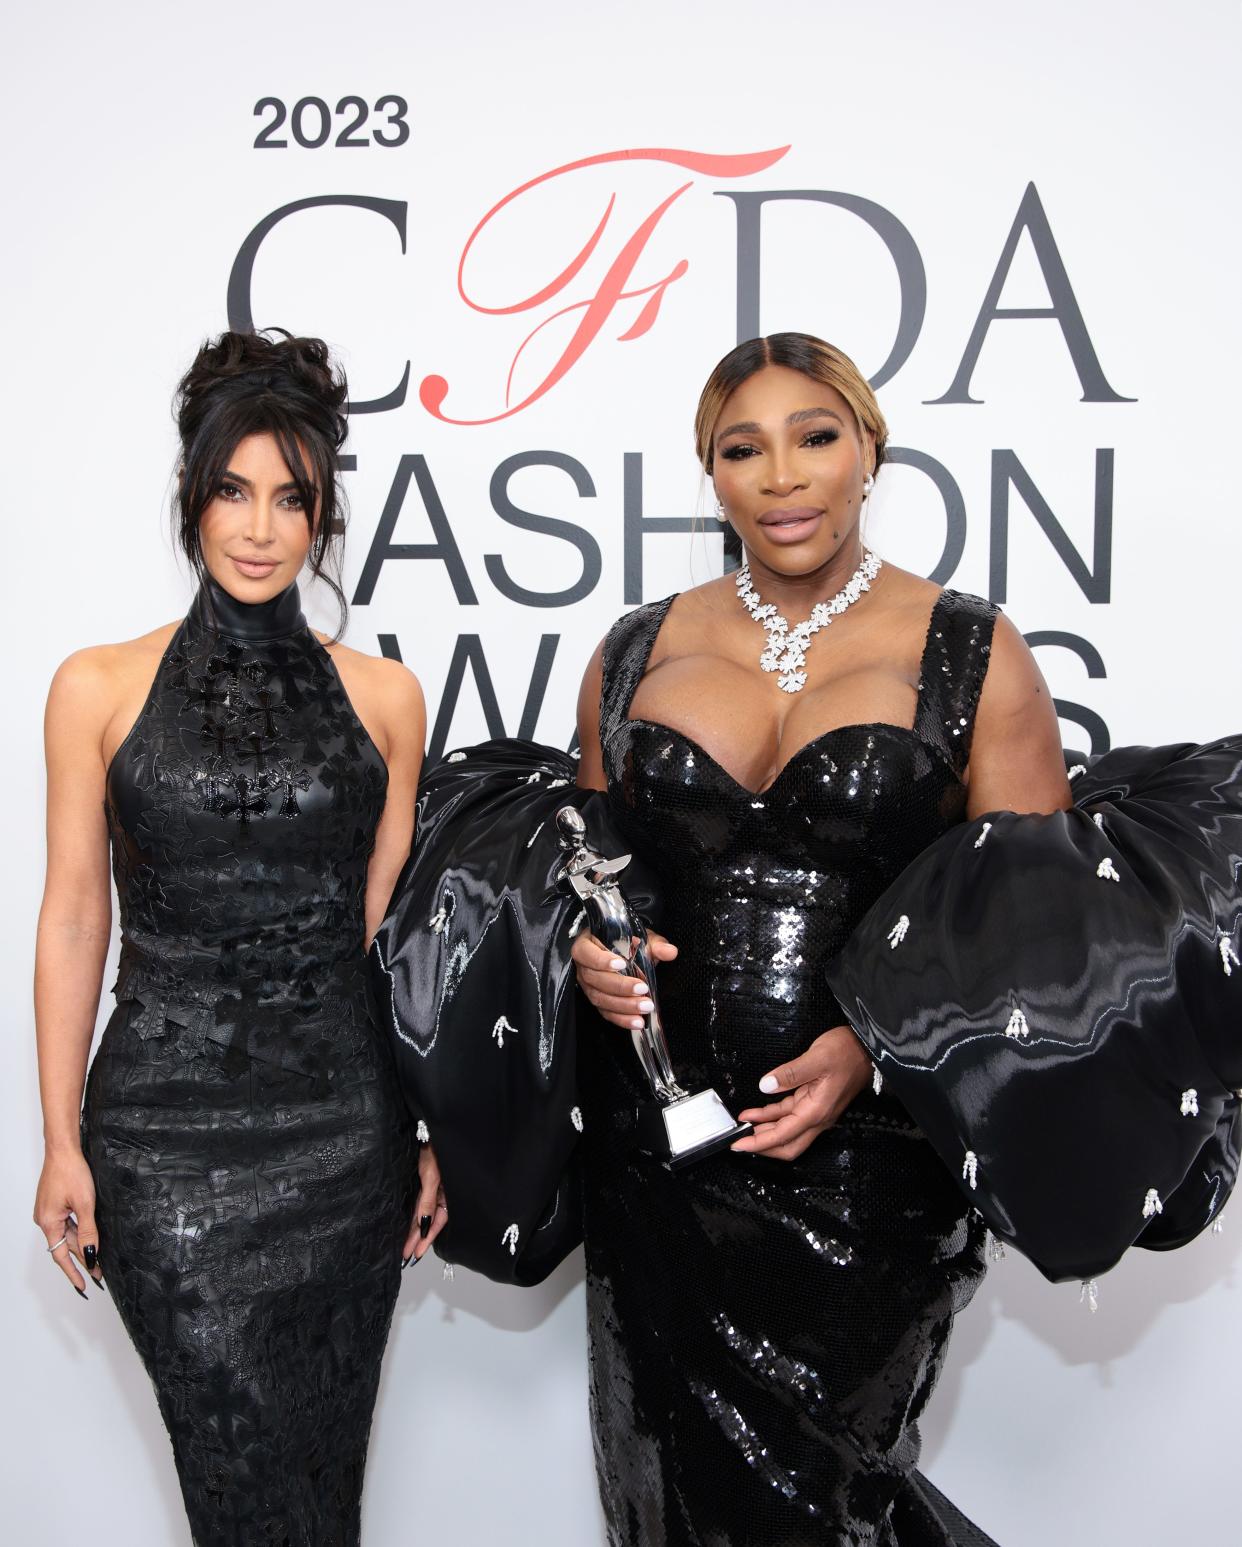 Serena Williams, fashion icon award winner, right, and Kim Kardashian, attend the 2023 CFDA Fashion Awards at American Museum of Natural History on Monday in New York City.